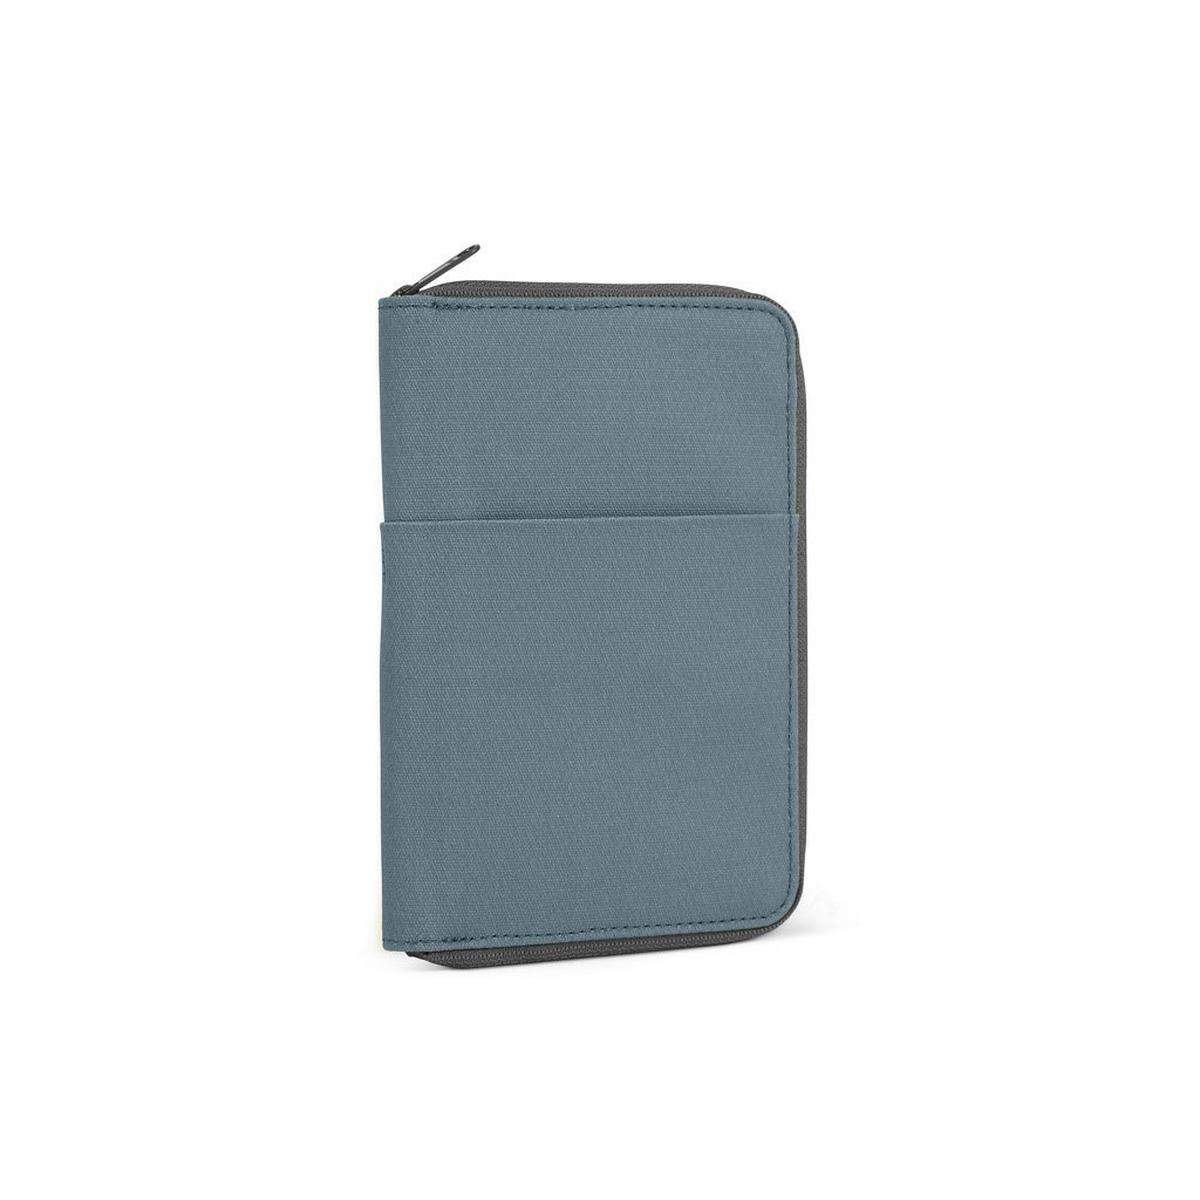 Millican Powell The Travel Wallet Small - Tarn